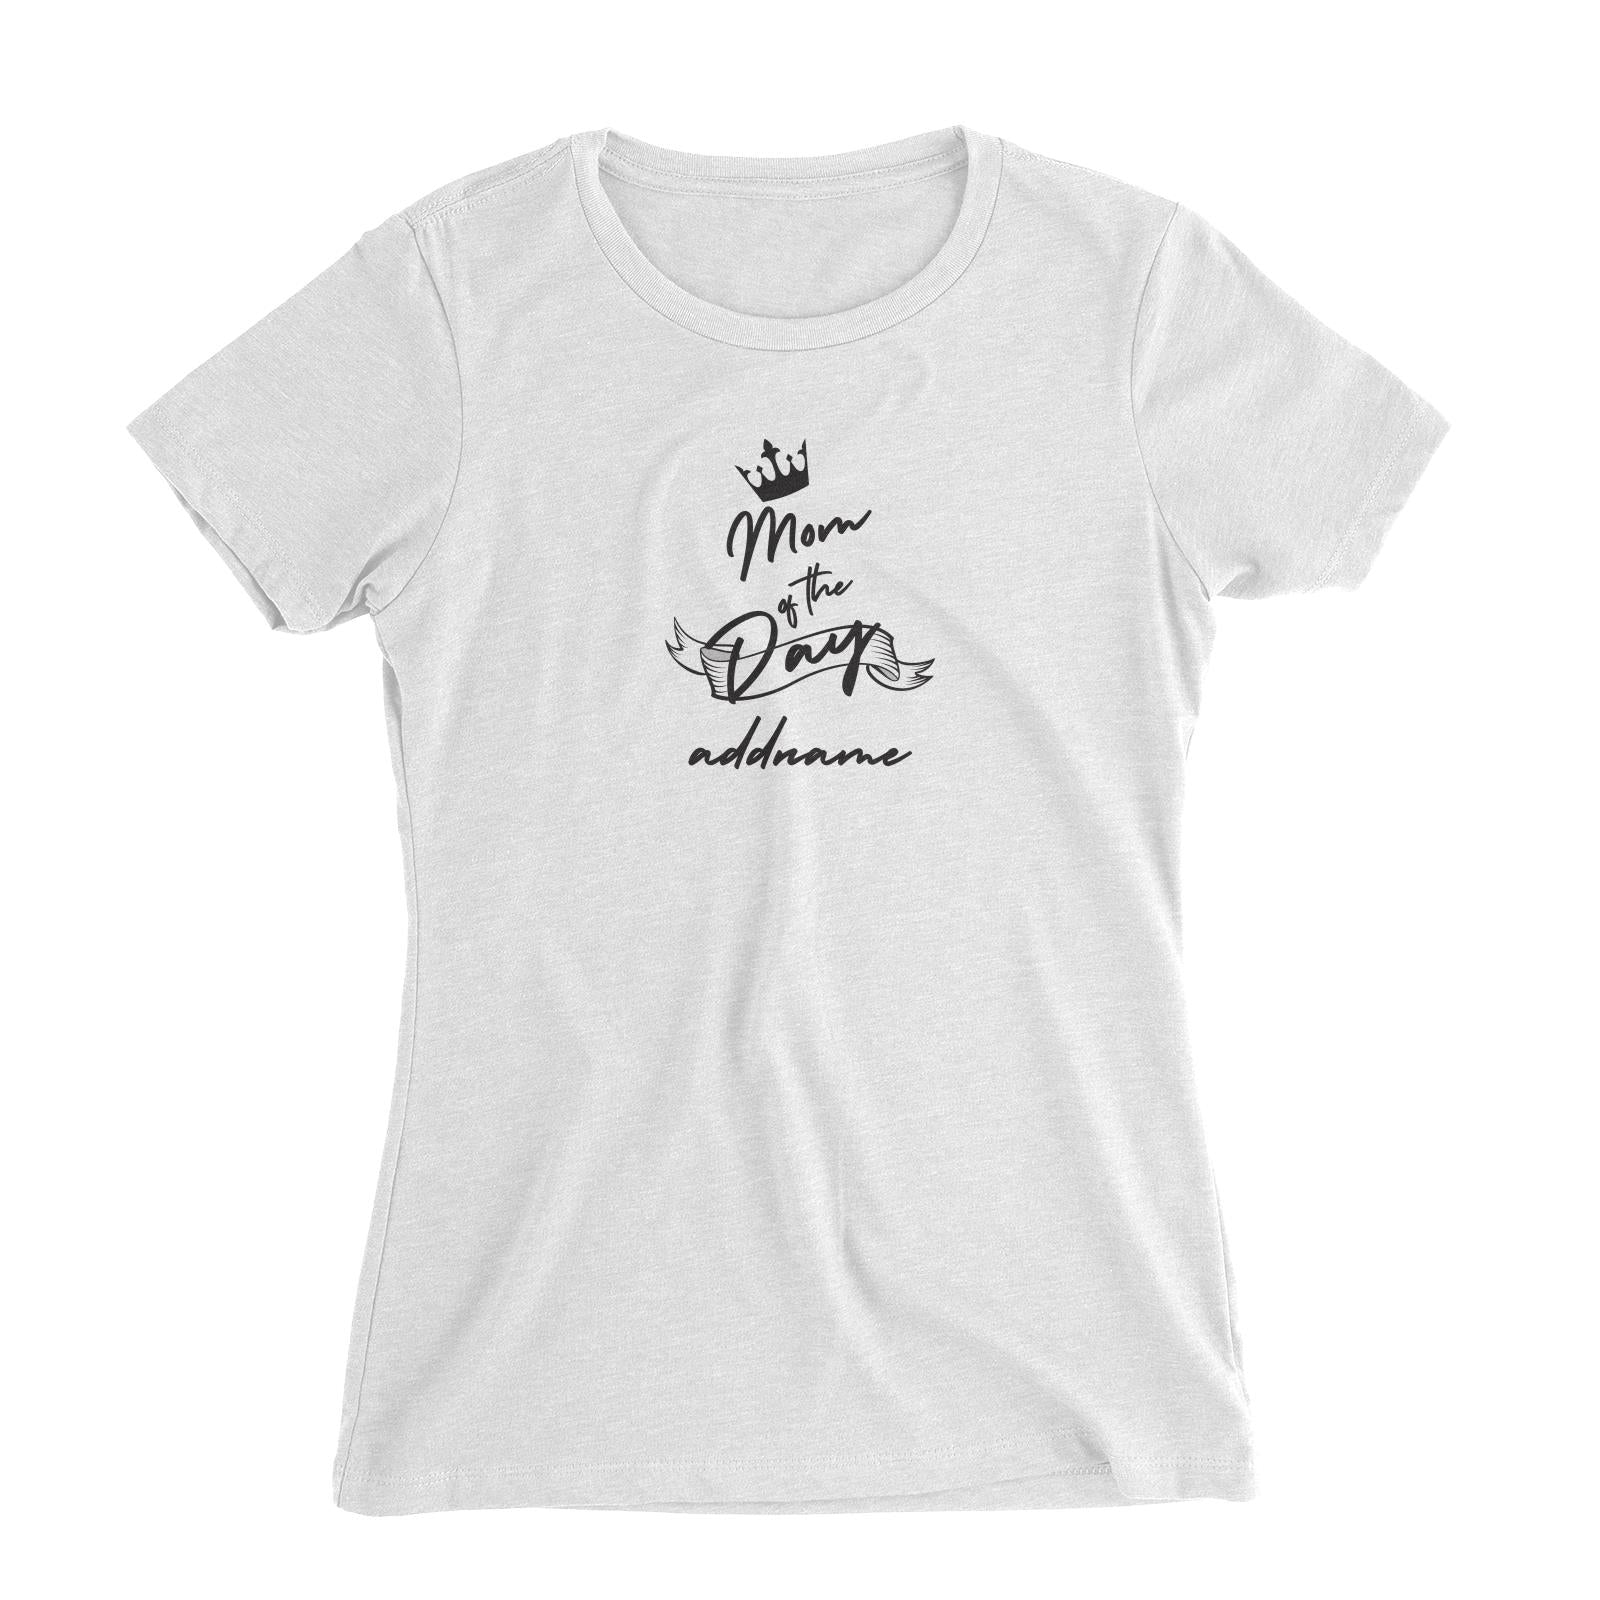 Birthday Typography Mom Of The Day Addname Women's Slim Fit T-Shirt